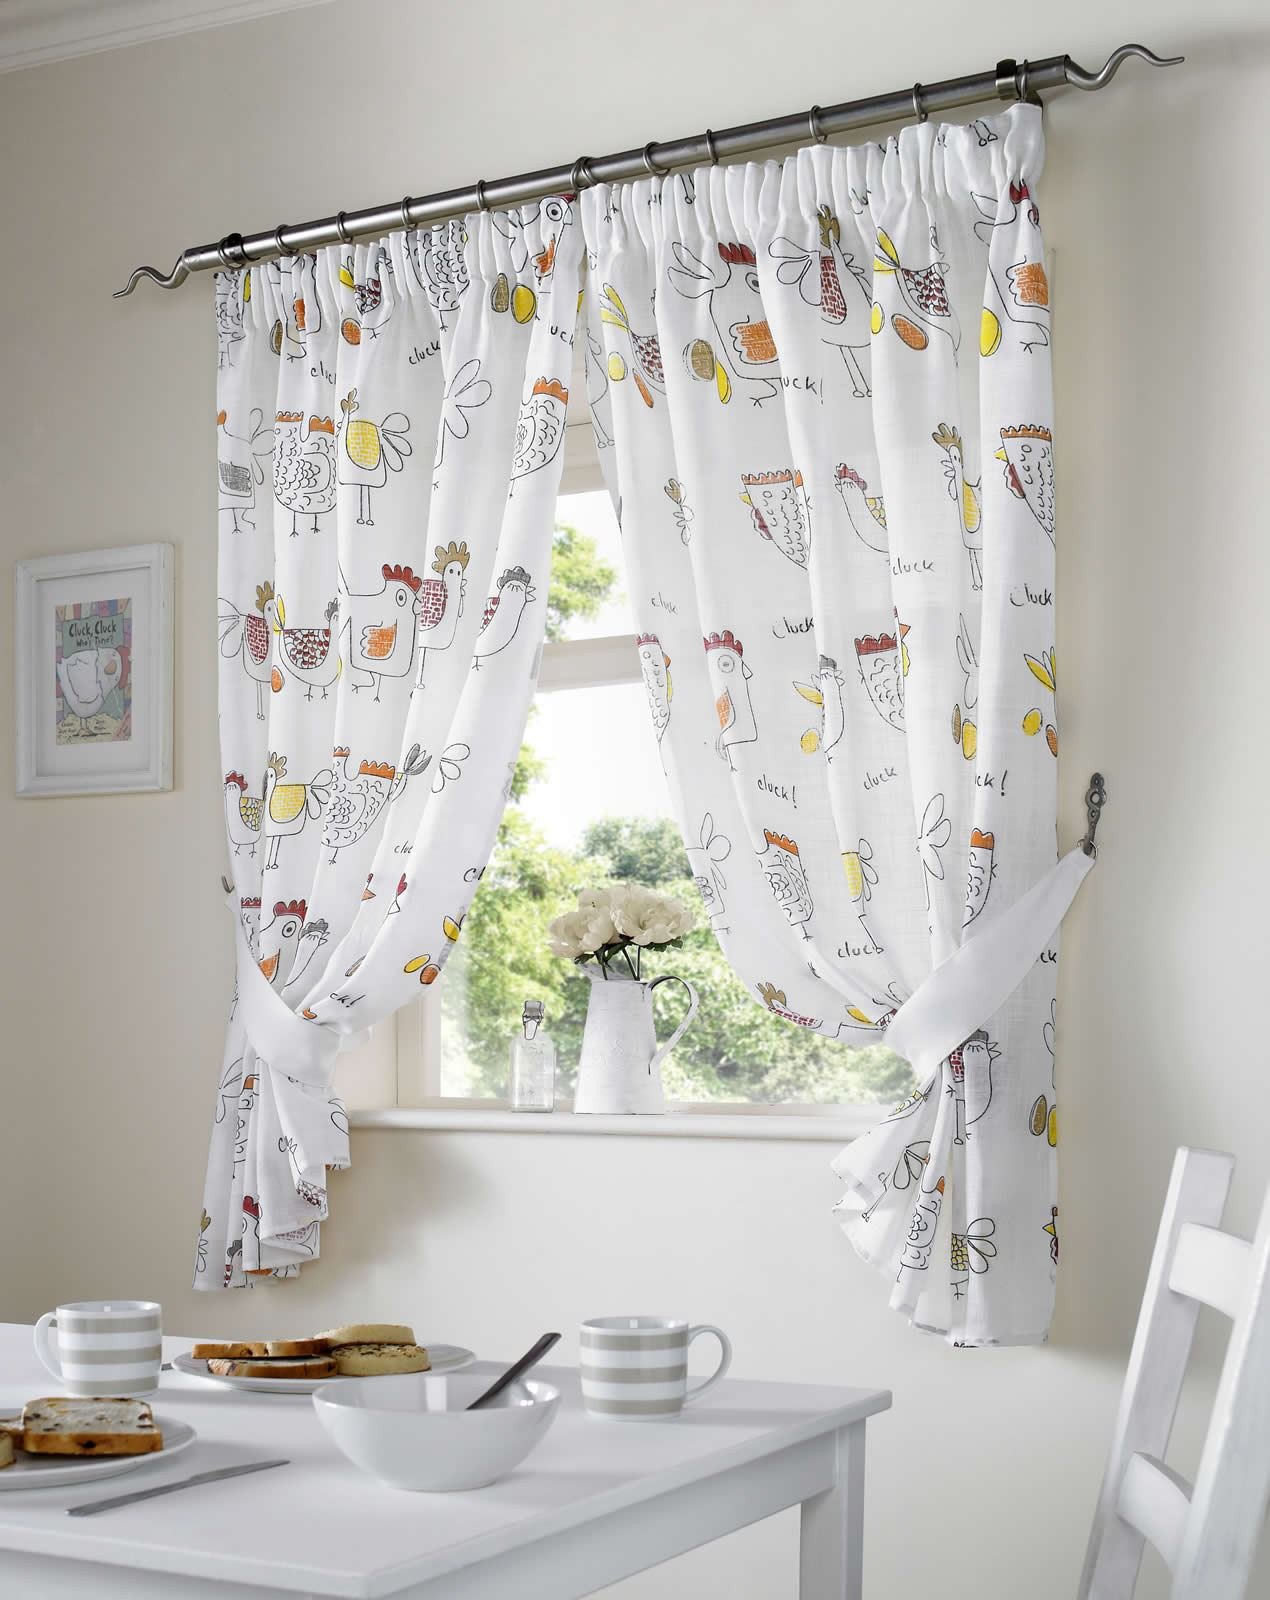 Kitchen Swags Curtains
 CHICKENS ROOSTER COUNTRY STYLE KITCHEN CURTAIN SET WINDOW